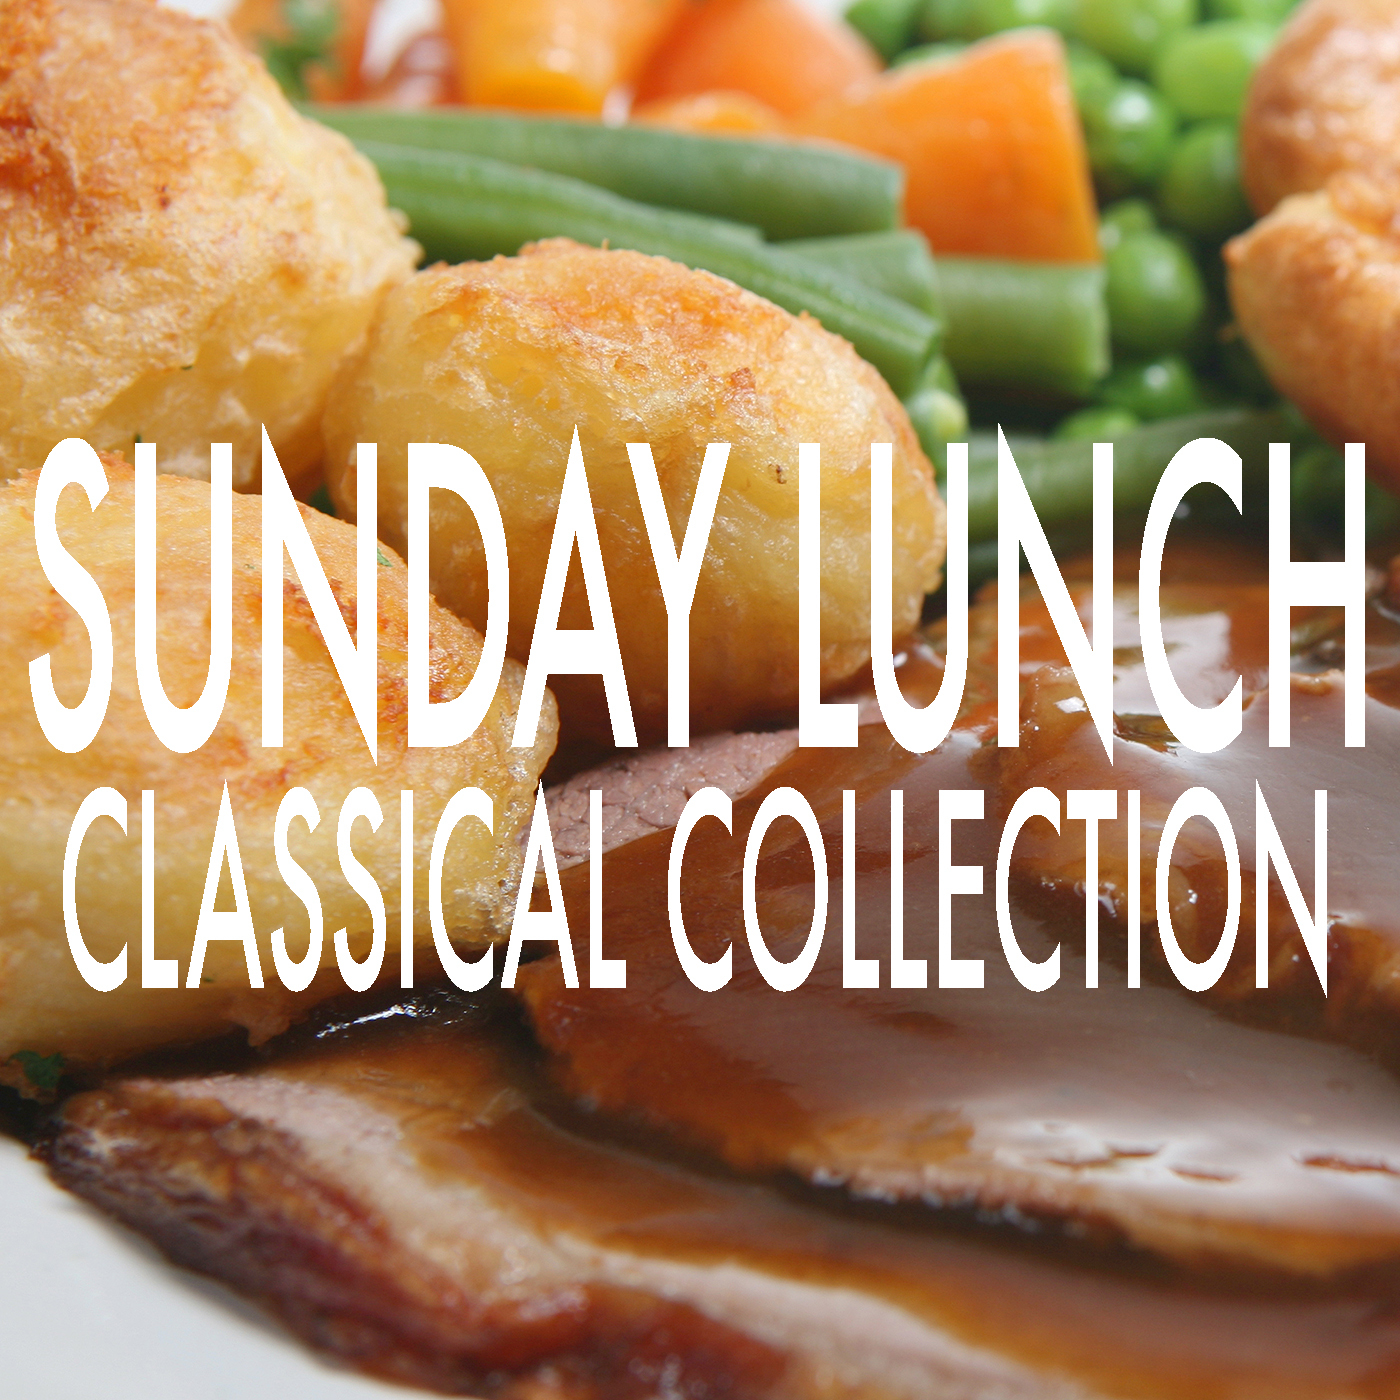 Sunday Lunch Classical Collection